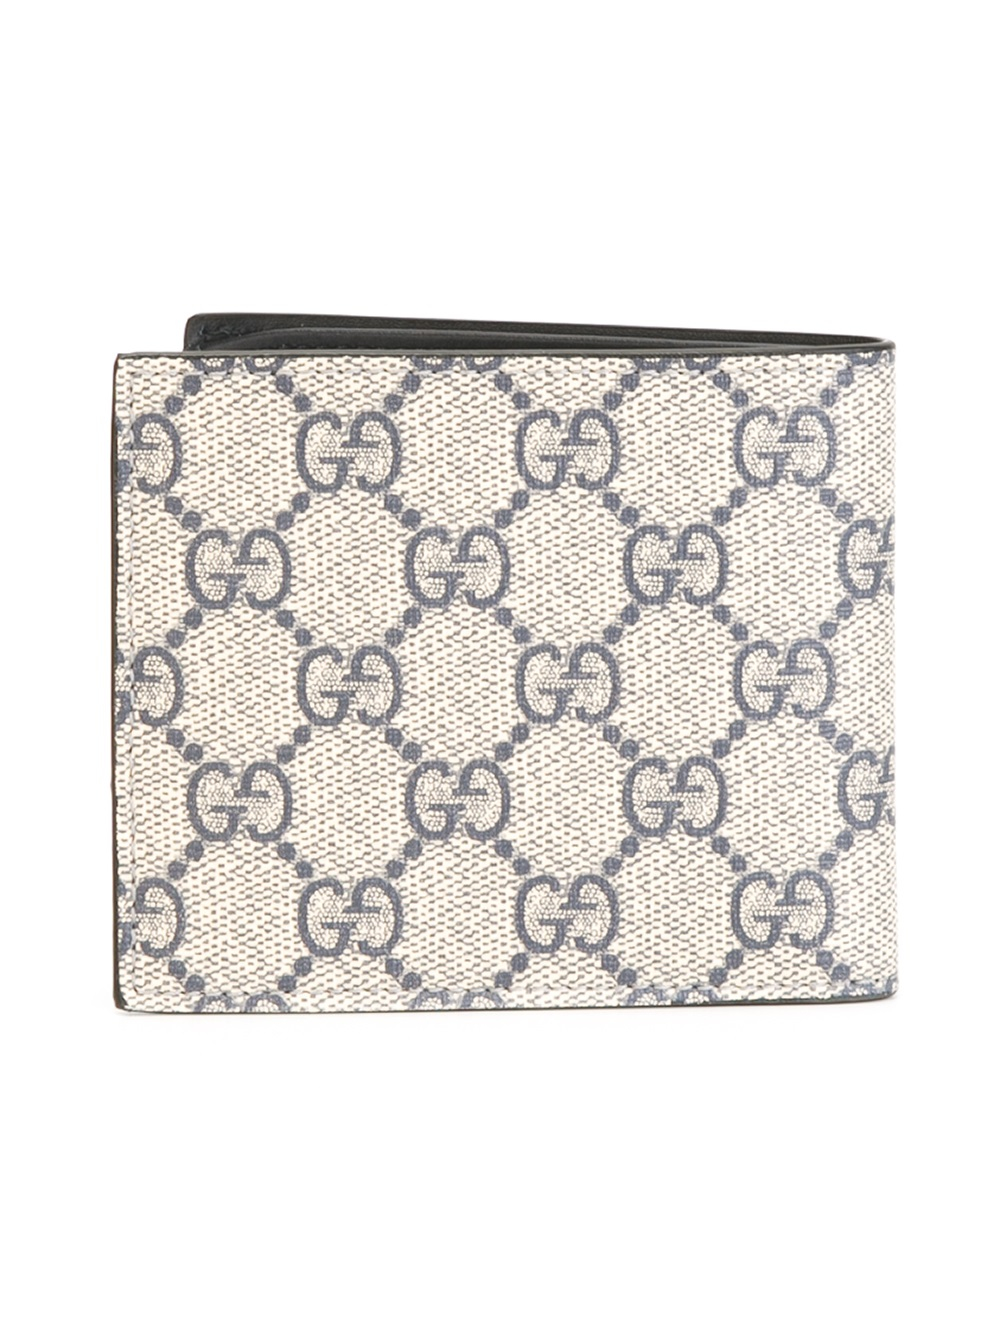 Gucci Gg Supreme Wallet in Natural for Men | Lyst